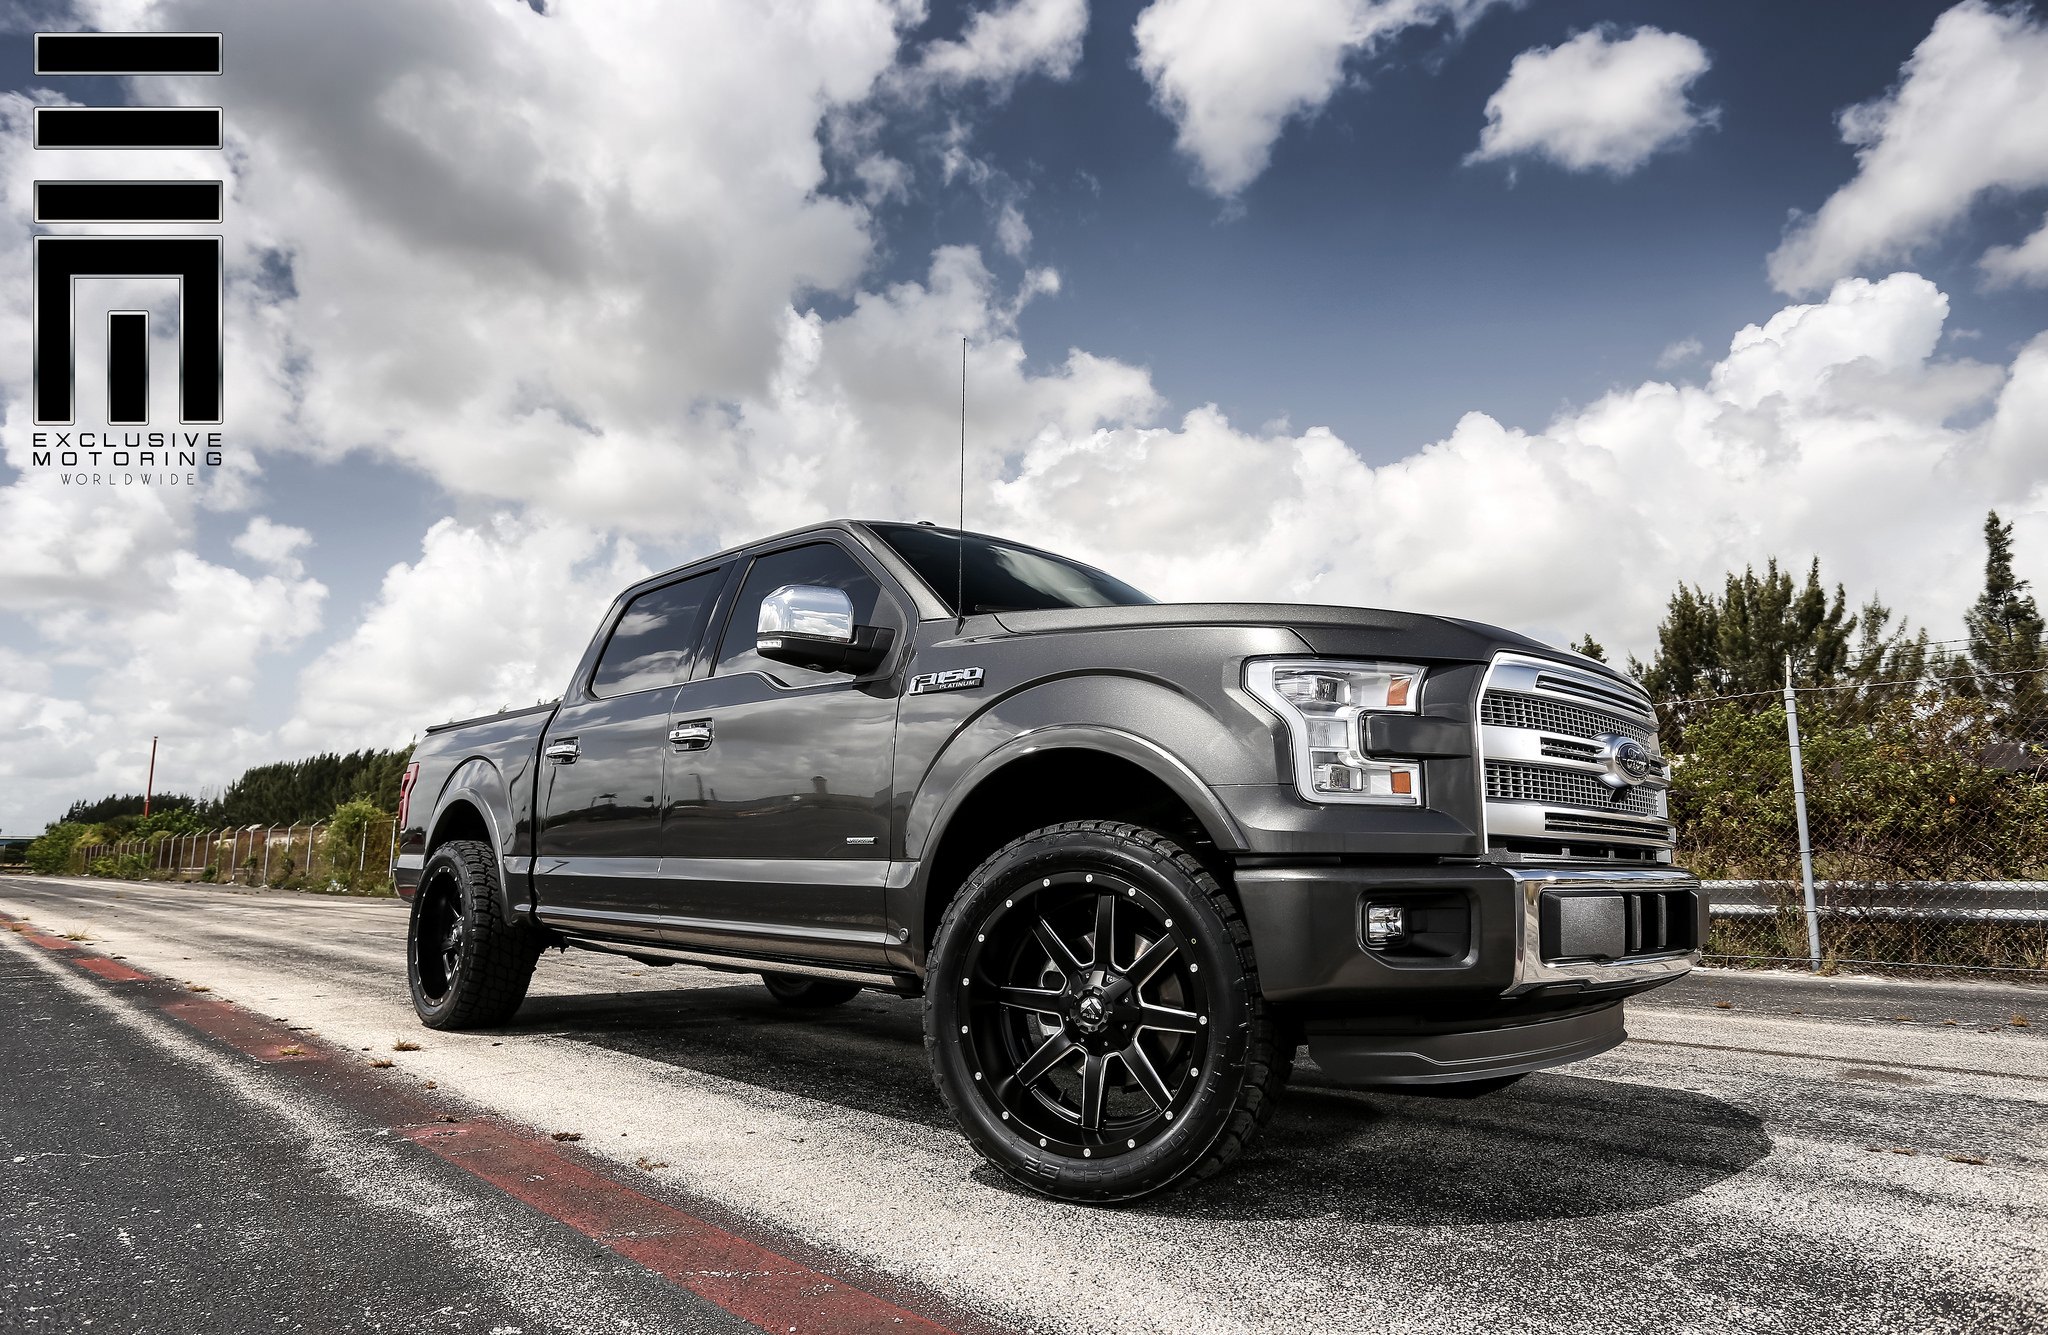 F150 With a Tough Wheels - Photo by Exclusive Motoring